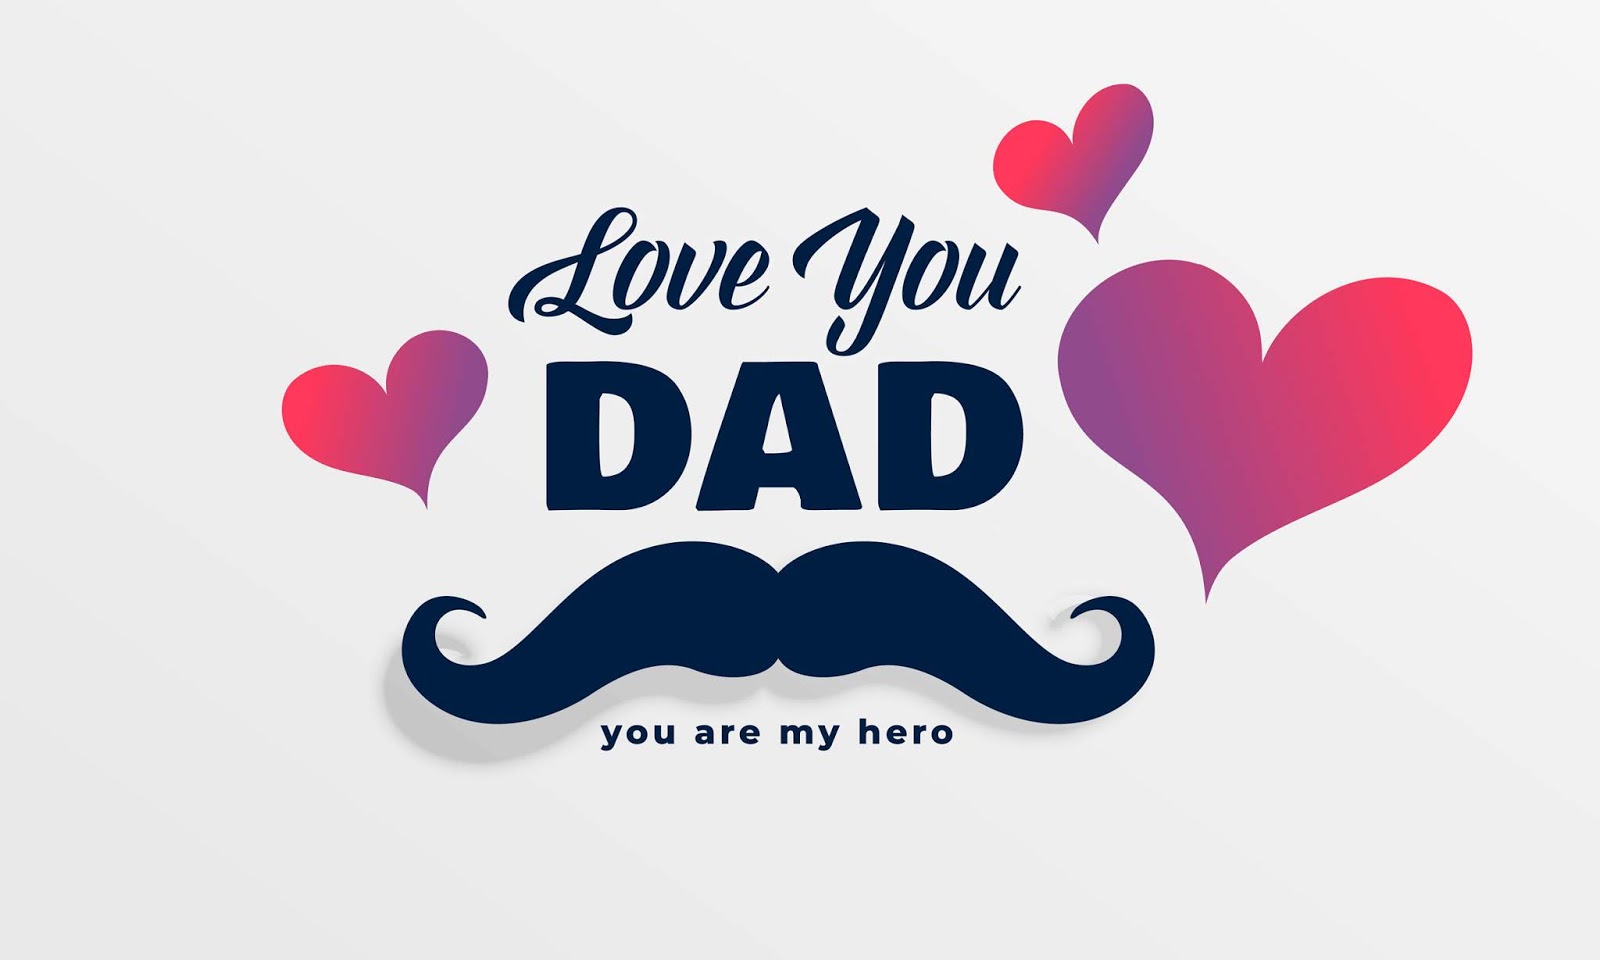 15th June - Happy Fathers Day Love You - 1600x960 Wallpaper 